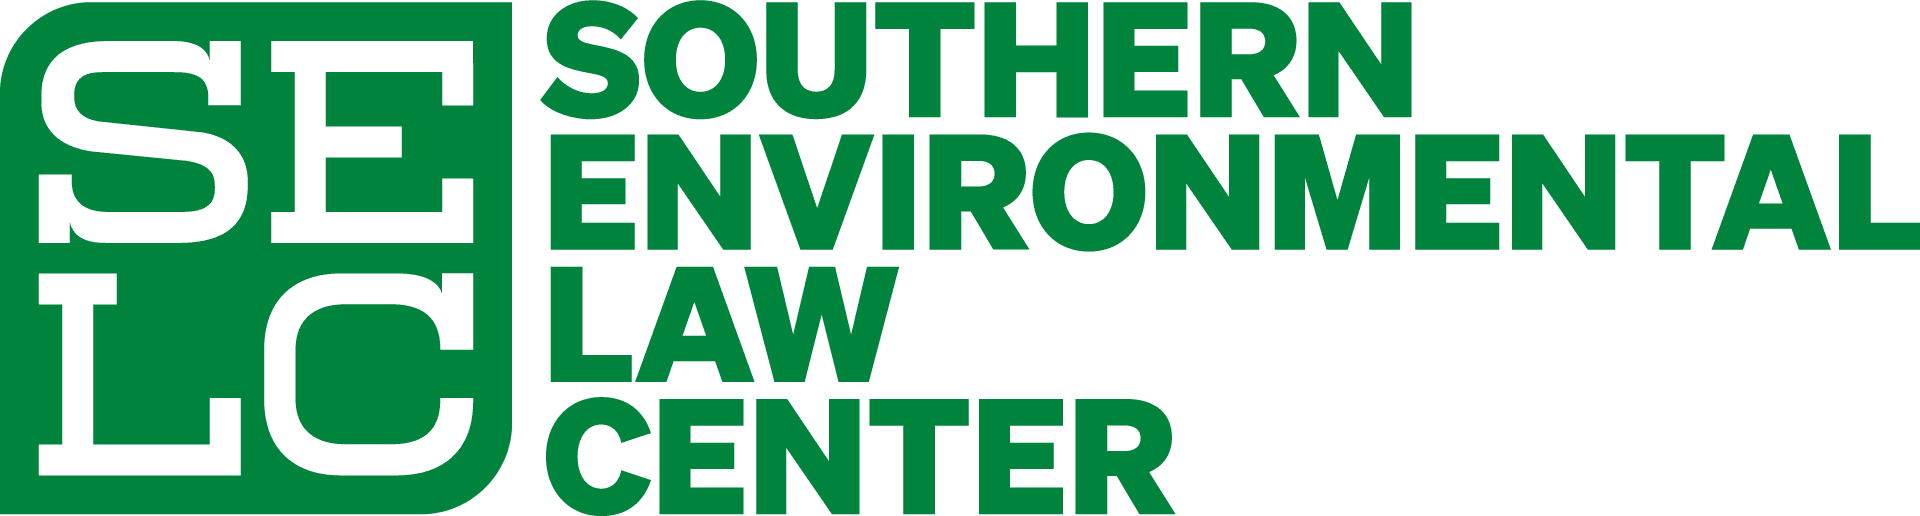 The Southern Environmental Law Center